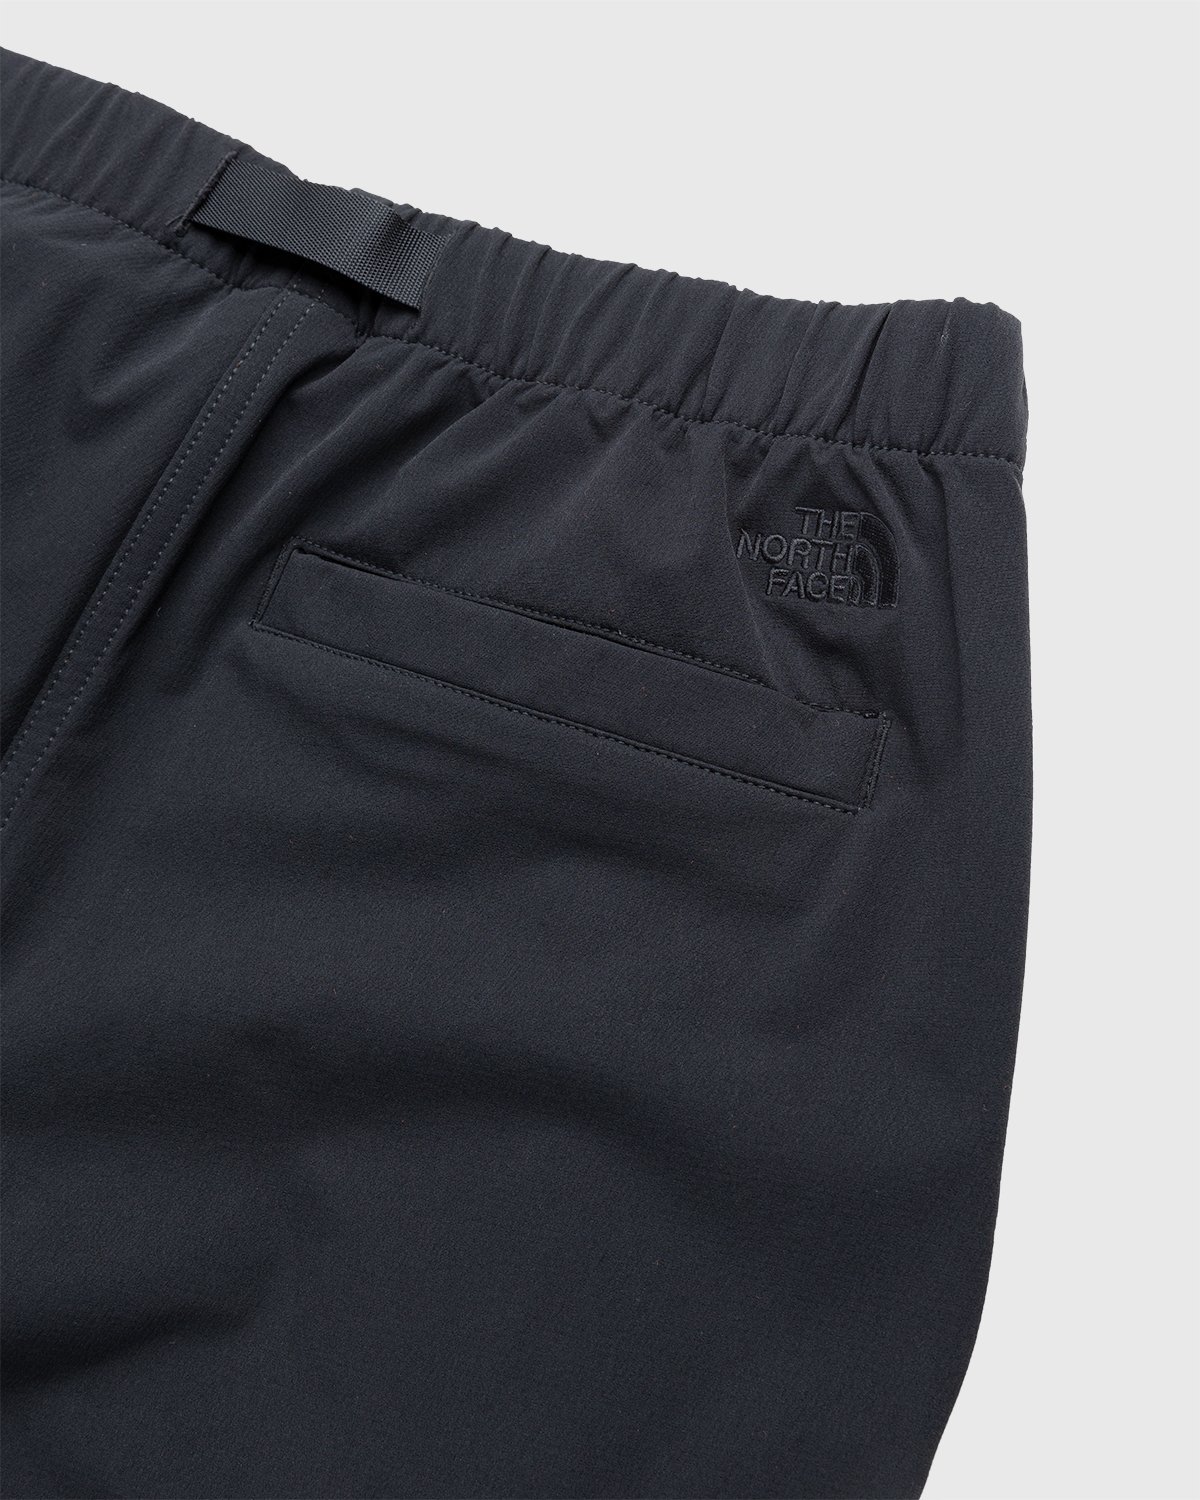 The North Face - Tech Easy Pant Black - Clothing - Black - Image 3